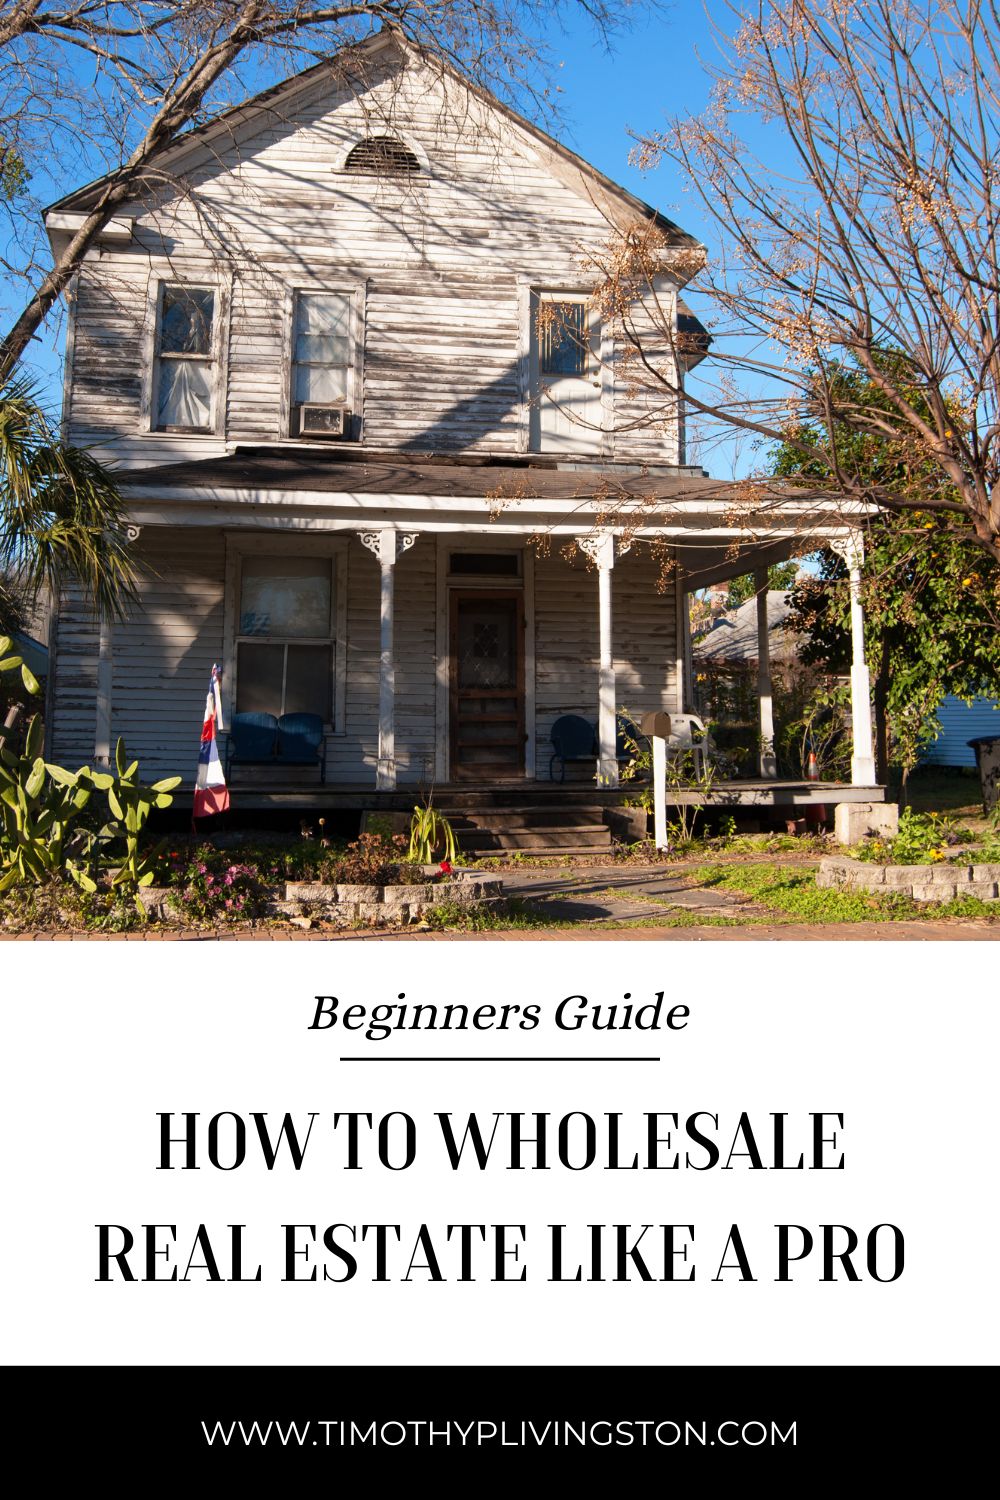 How to Wholesale Real Estate Like a Pro